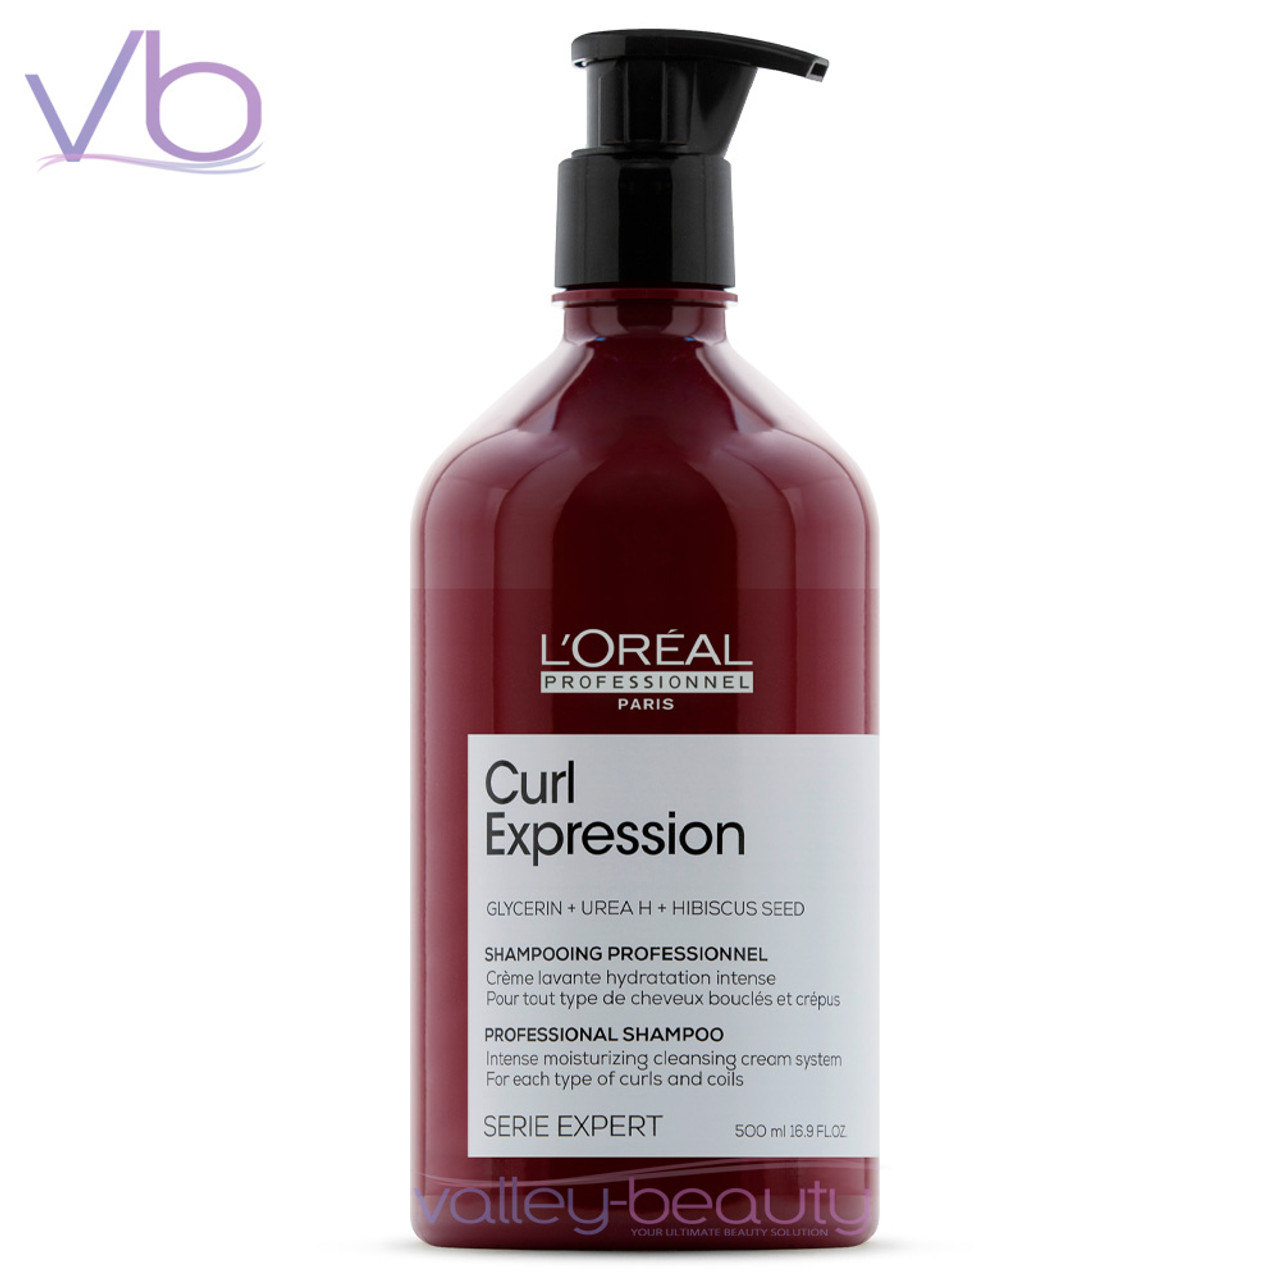 L'Oreal L’Oreal Curl Expression Moisturizing Shampoo | Gentle Cream Cleanser for Curly, Coily and Wavy Hair, 16.9 fl.oz.